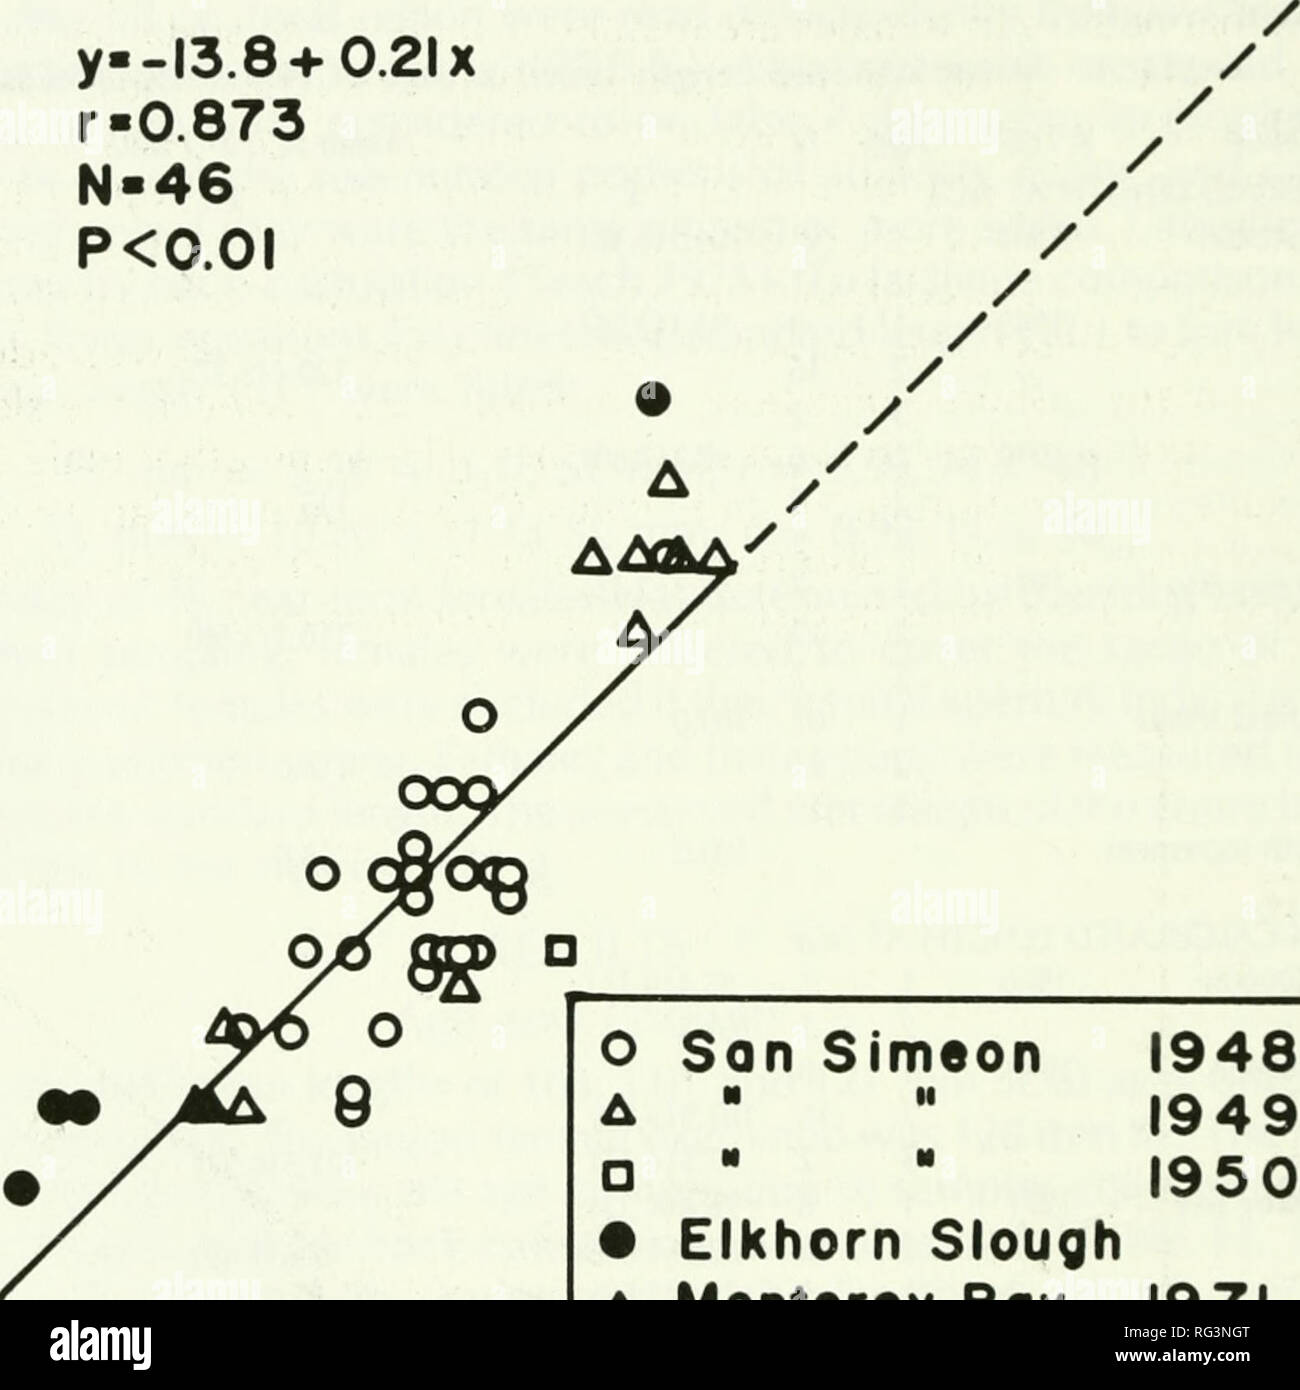 . California fish and game. Fisheries -- California; Game and game-birds -- California; Fishes -- California; Animal Population Groups; PÃªches; Gibier; Poissons. 100 CALIFORNIA FISH AND GAME length (Figure 3) also increased with female SL (San Sinneon 1948: y = â25.4 + 0.51 X, r = 0.633, N = 29, P &lt; 0.01). Near-term embryos collected at San Simeon averaged 27% of the SL of their female parents in June 1948 and 26% in July 1949 (range 18-34%). 20 15 - UJ N (/) o oio q: y--l3.8+0.2lx r-0.873 N-46 P&lt;O.OI. o Son Simeon 1948 A 1949 D 1950 â¢ Elkhorn Slough â² Monterey Bay 1971 â Oregon 1968  Stock Photo